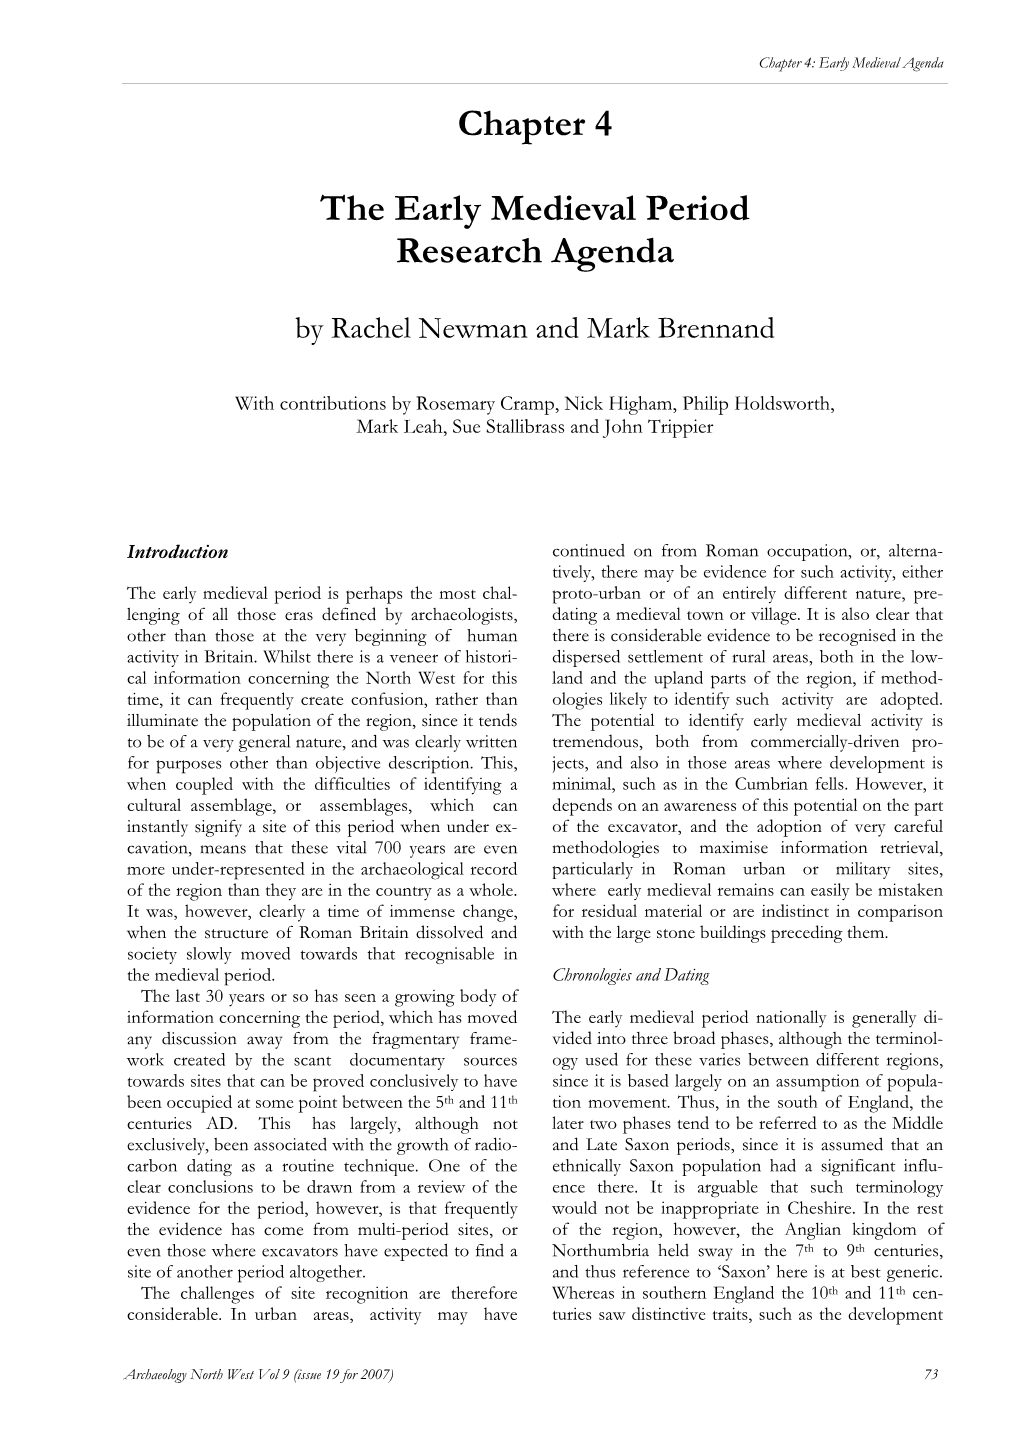 4. the Early Medieval Period Research Agenda (Pdf)